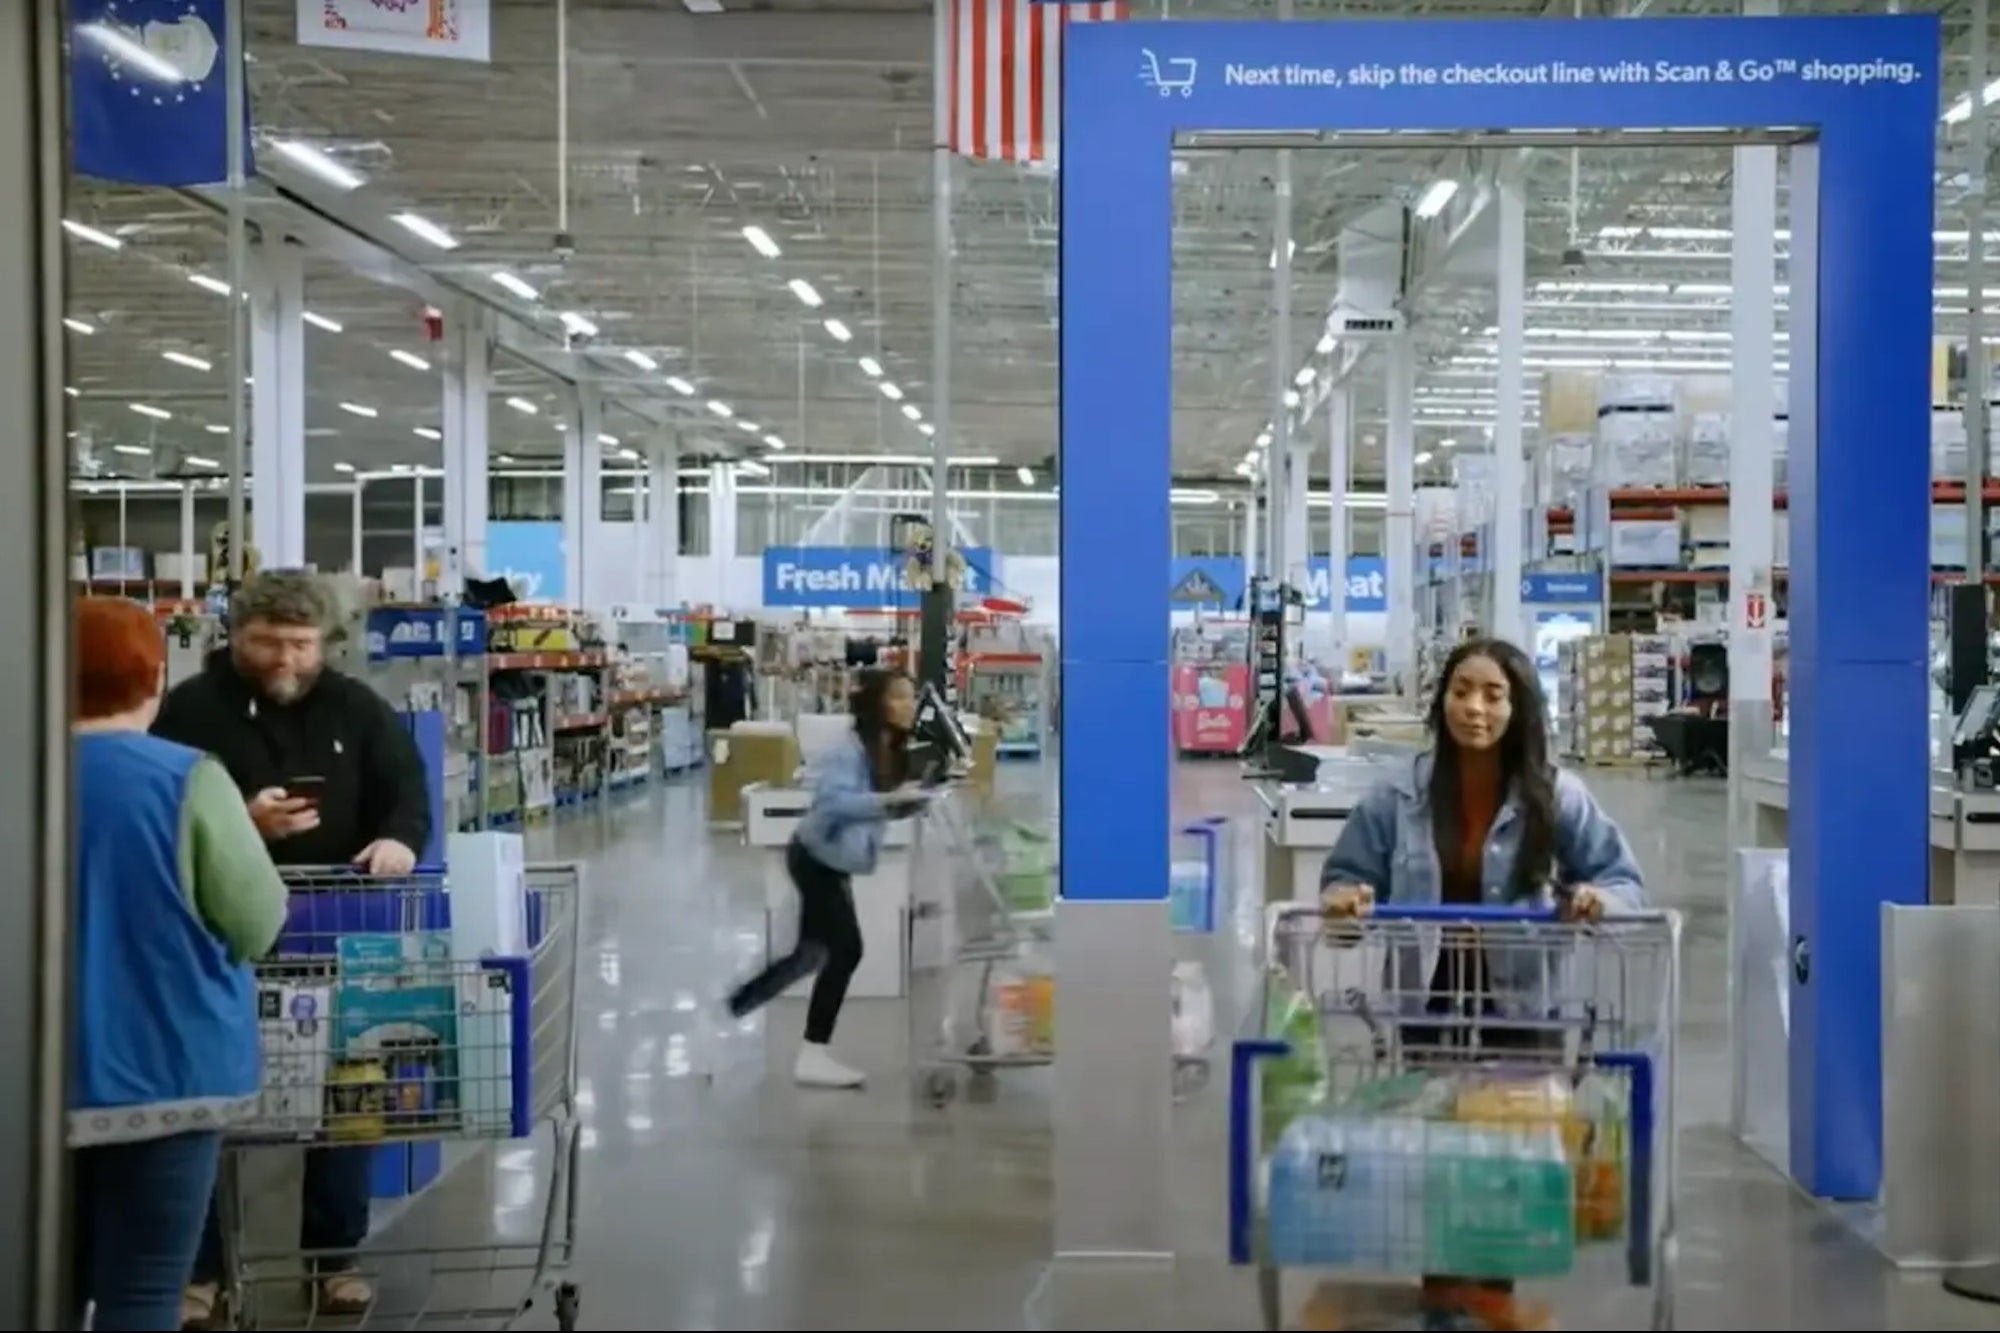 Skip the Line: How Sam's Club's New AI Checkout Lets You Pay and Go in a Flash